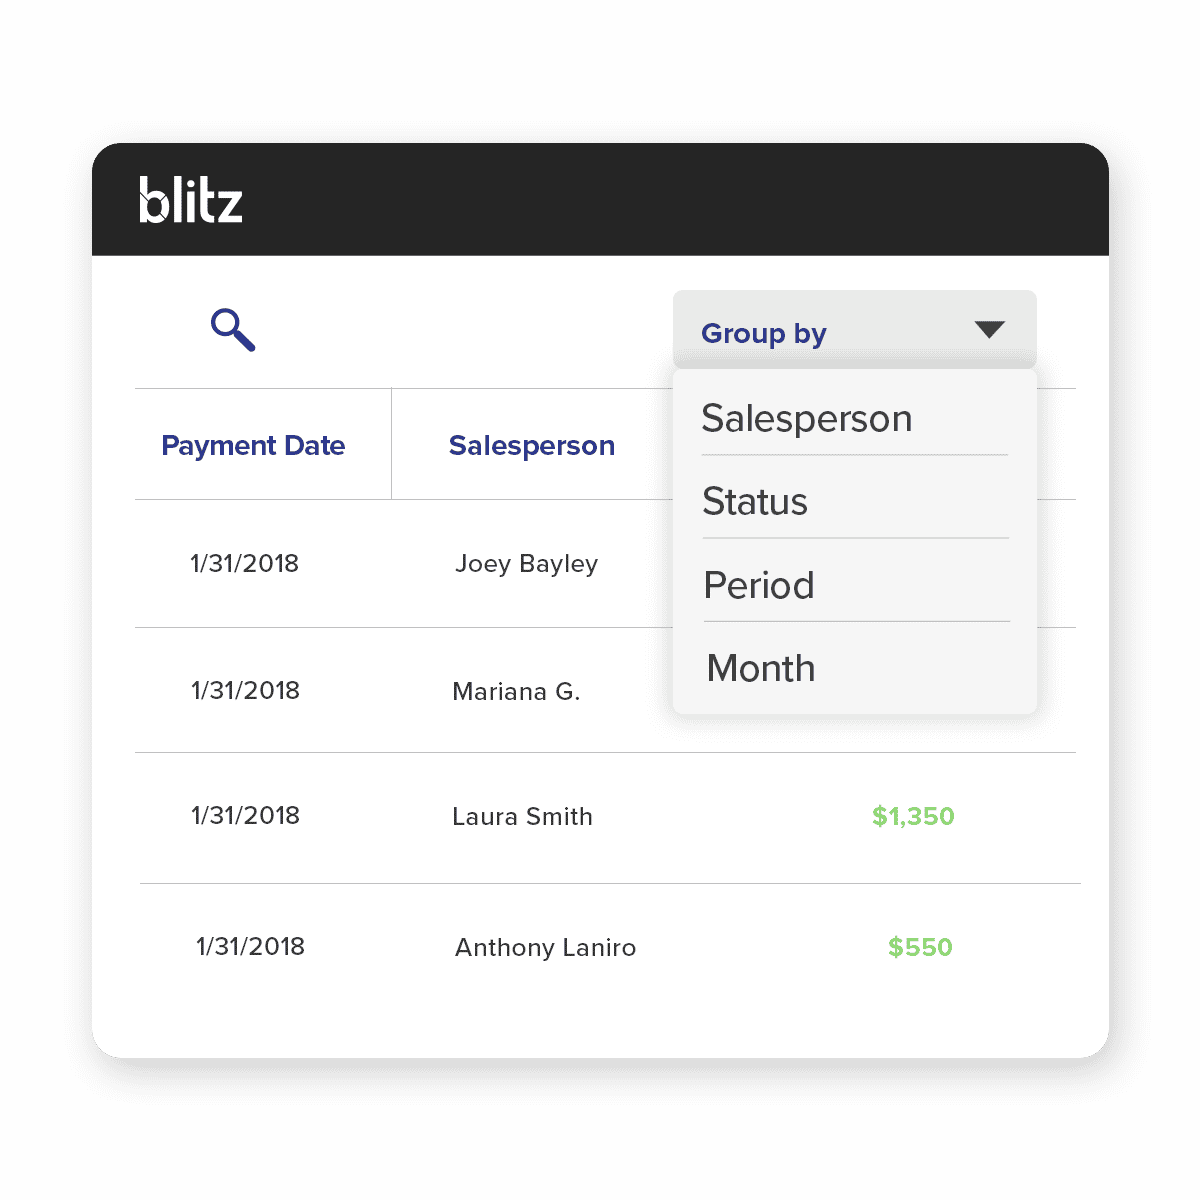 Allow sales teams to  access to their commission numbers and make on-demand reporting with accurate data through interactive dashboards through Blitz.